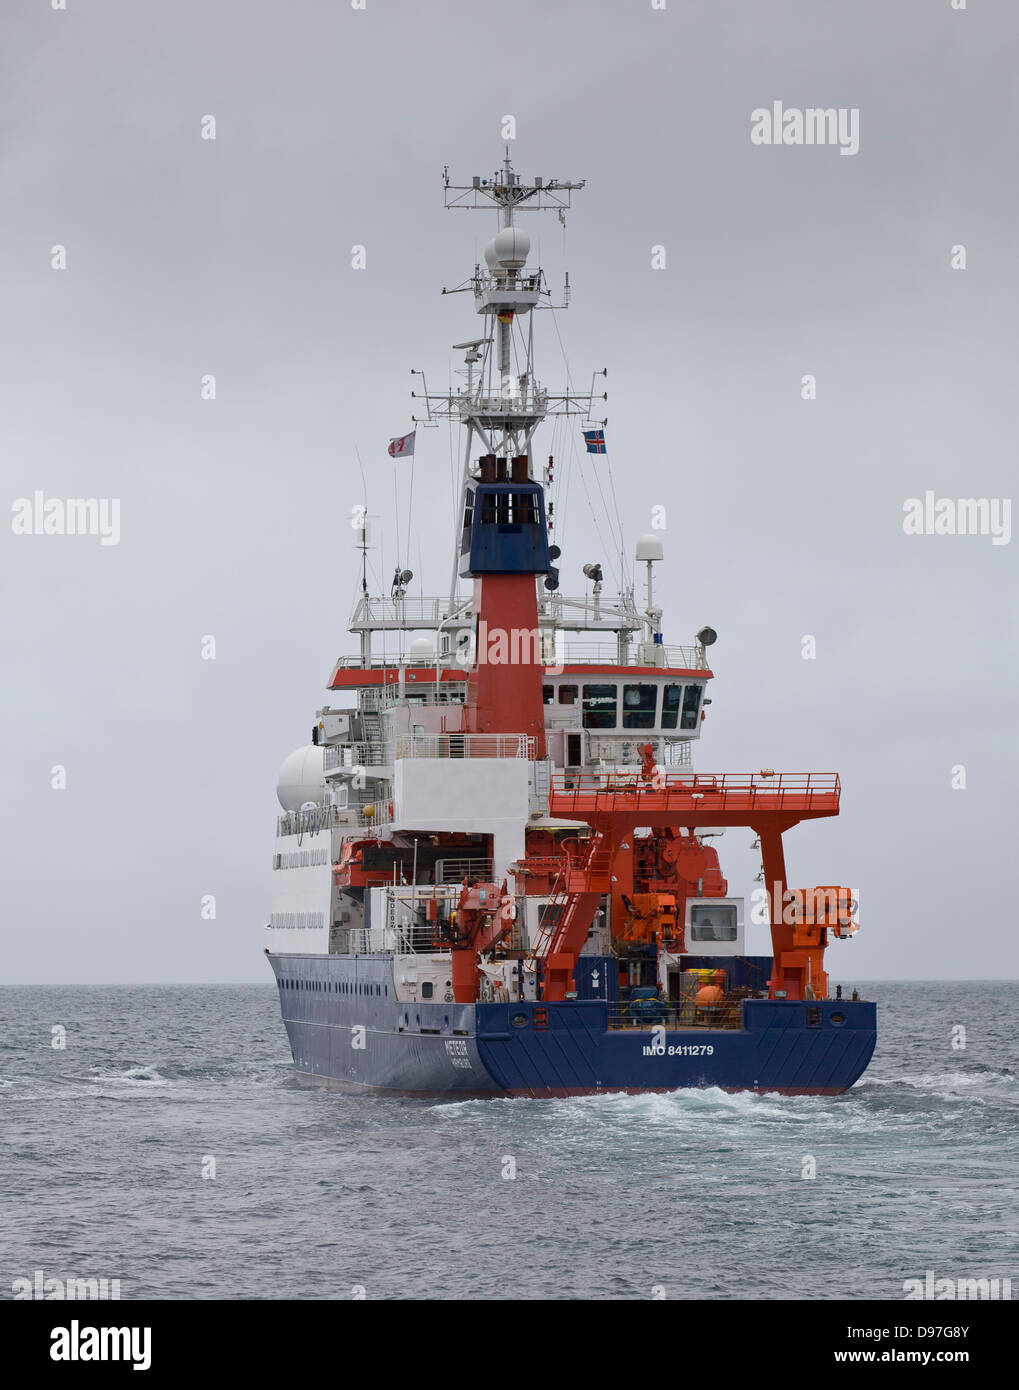 Research Ship, North Atlantic Ocean, Iceland Stock Photo